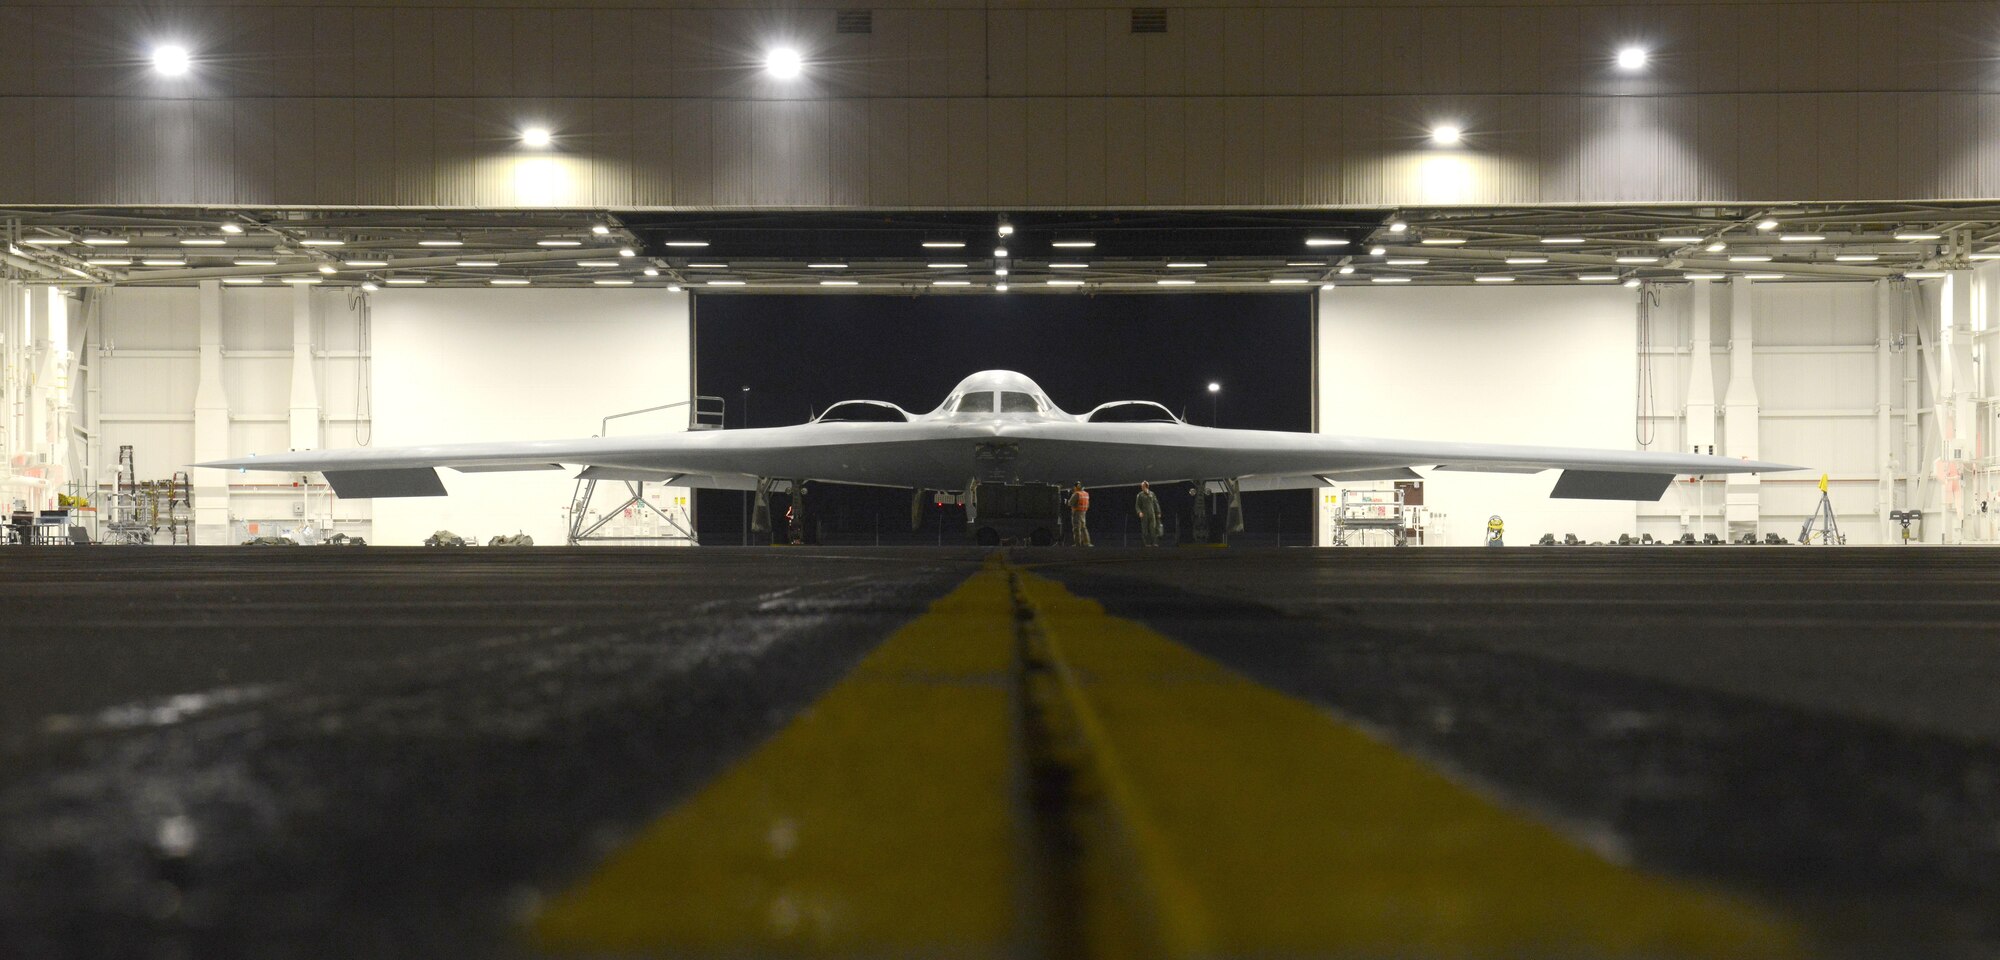 B-2 spirit stealth bombers from the 509th Bomb Wing at Whiteman Air Force Base, Missouri prepares for operations, in conjunction with the Libyan Government of National Accord, the U.S. military conducted precision airstrikes Jan. 18, 2017 destroying two Daesh camps 45 kilometers southwest of Sirte. (U.S. Air Force photo by Senior Airman Joel Pfiester)